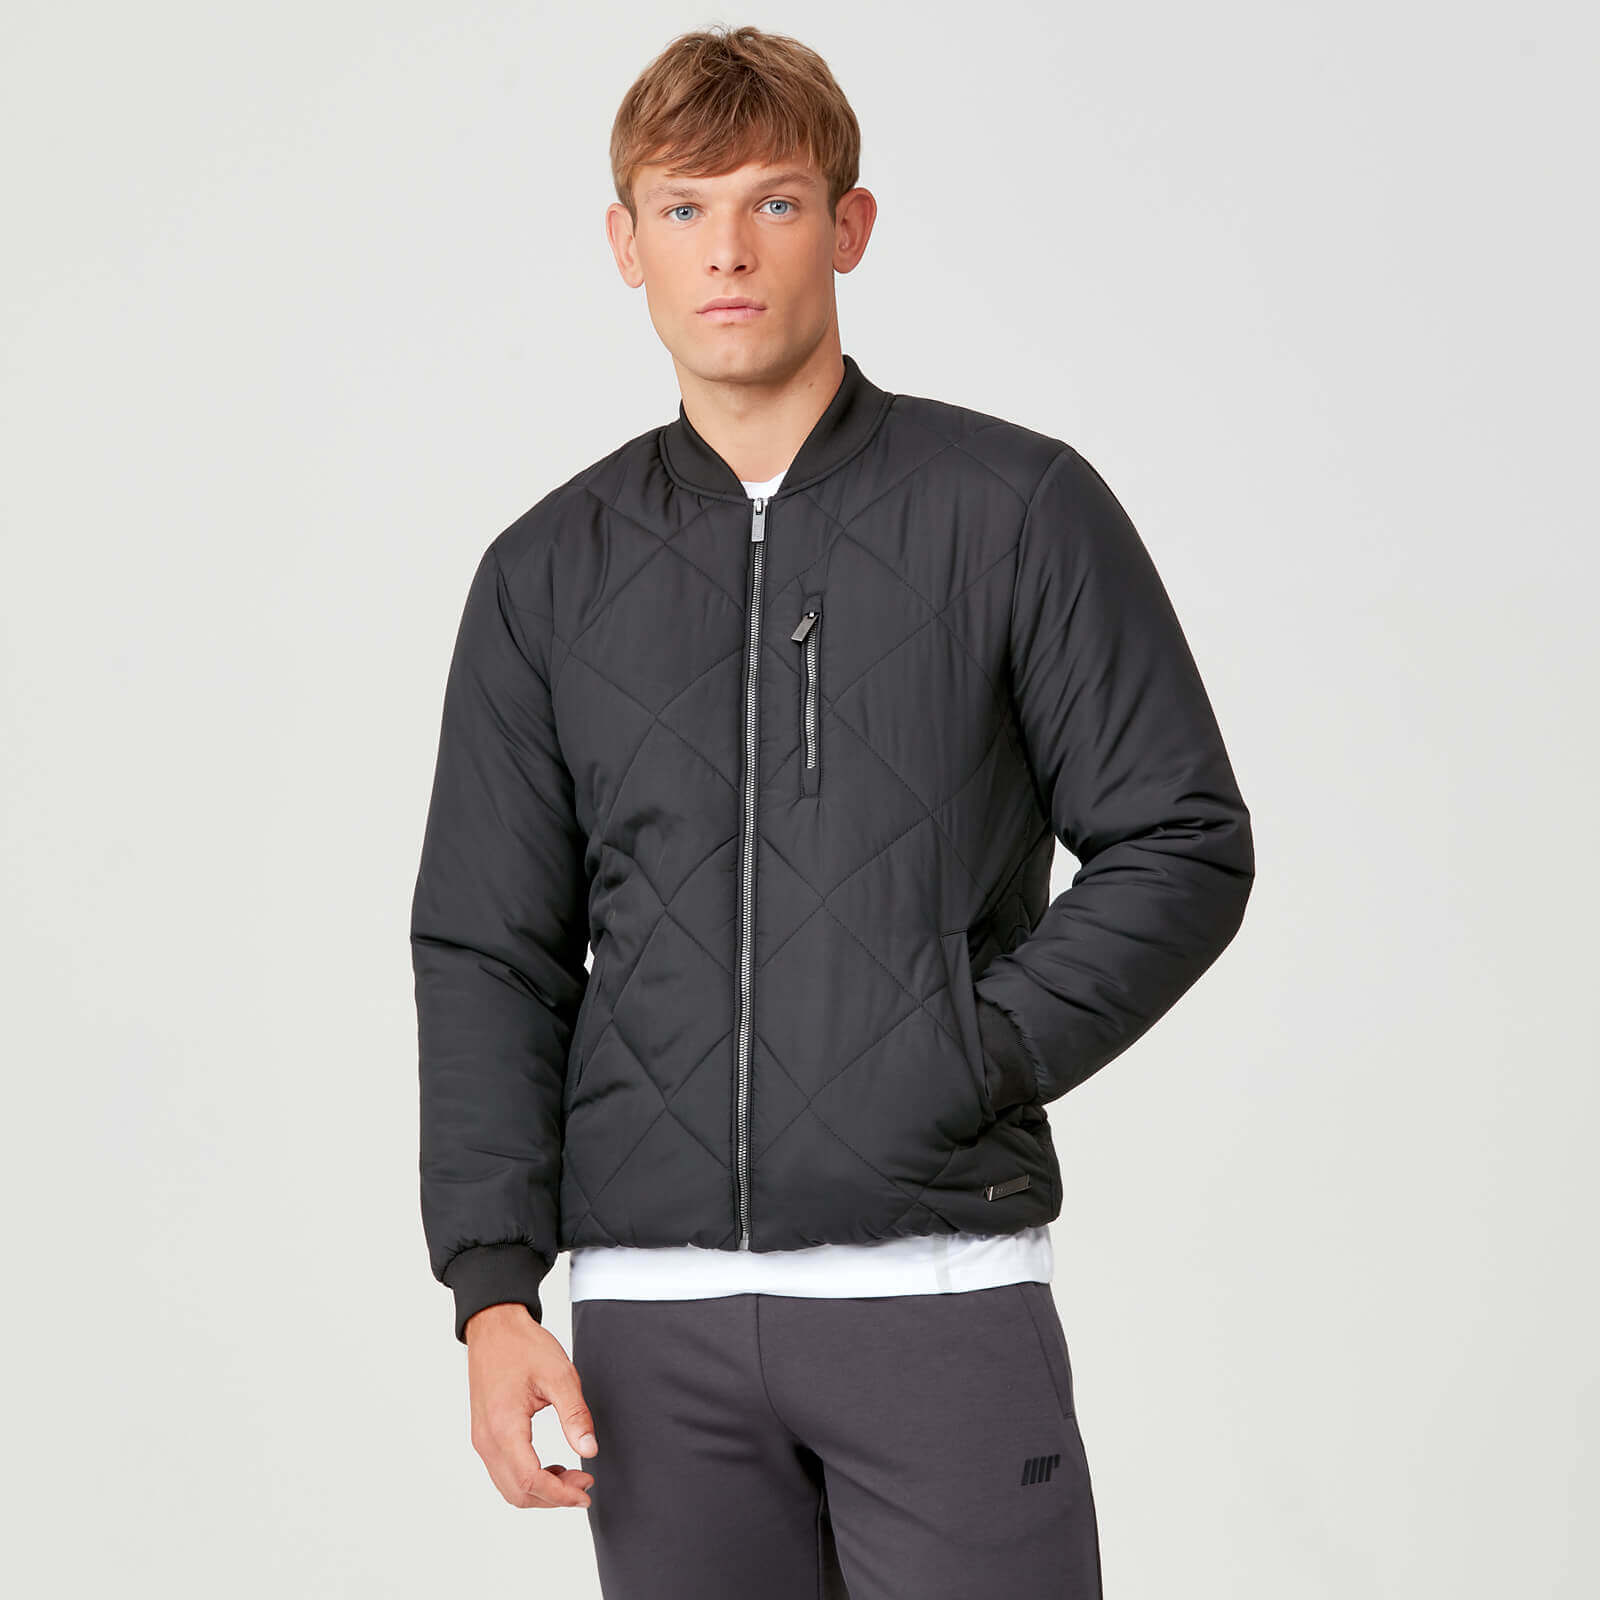 MP Pro-Tech Quilted Bomber Jacket - Black